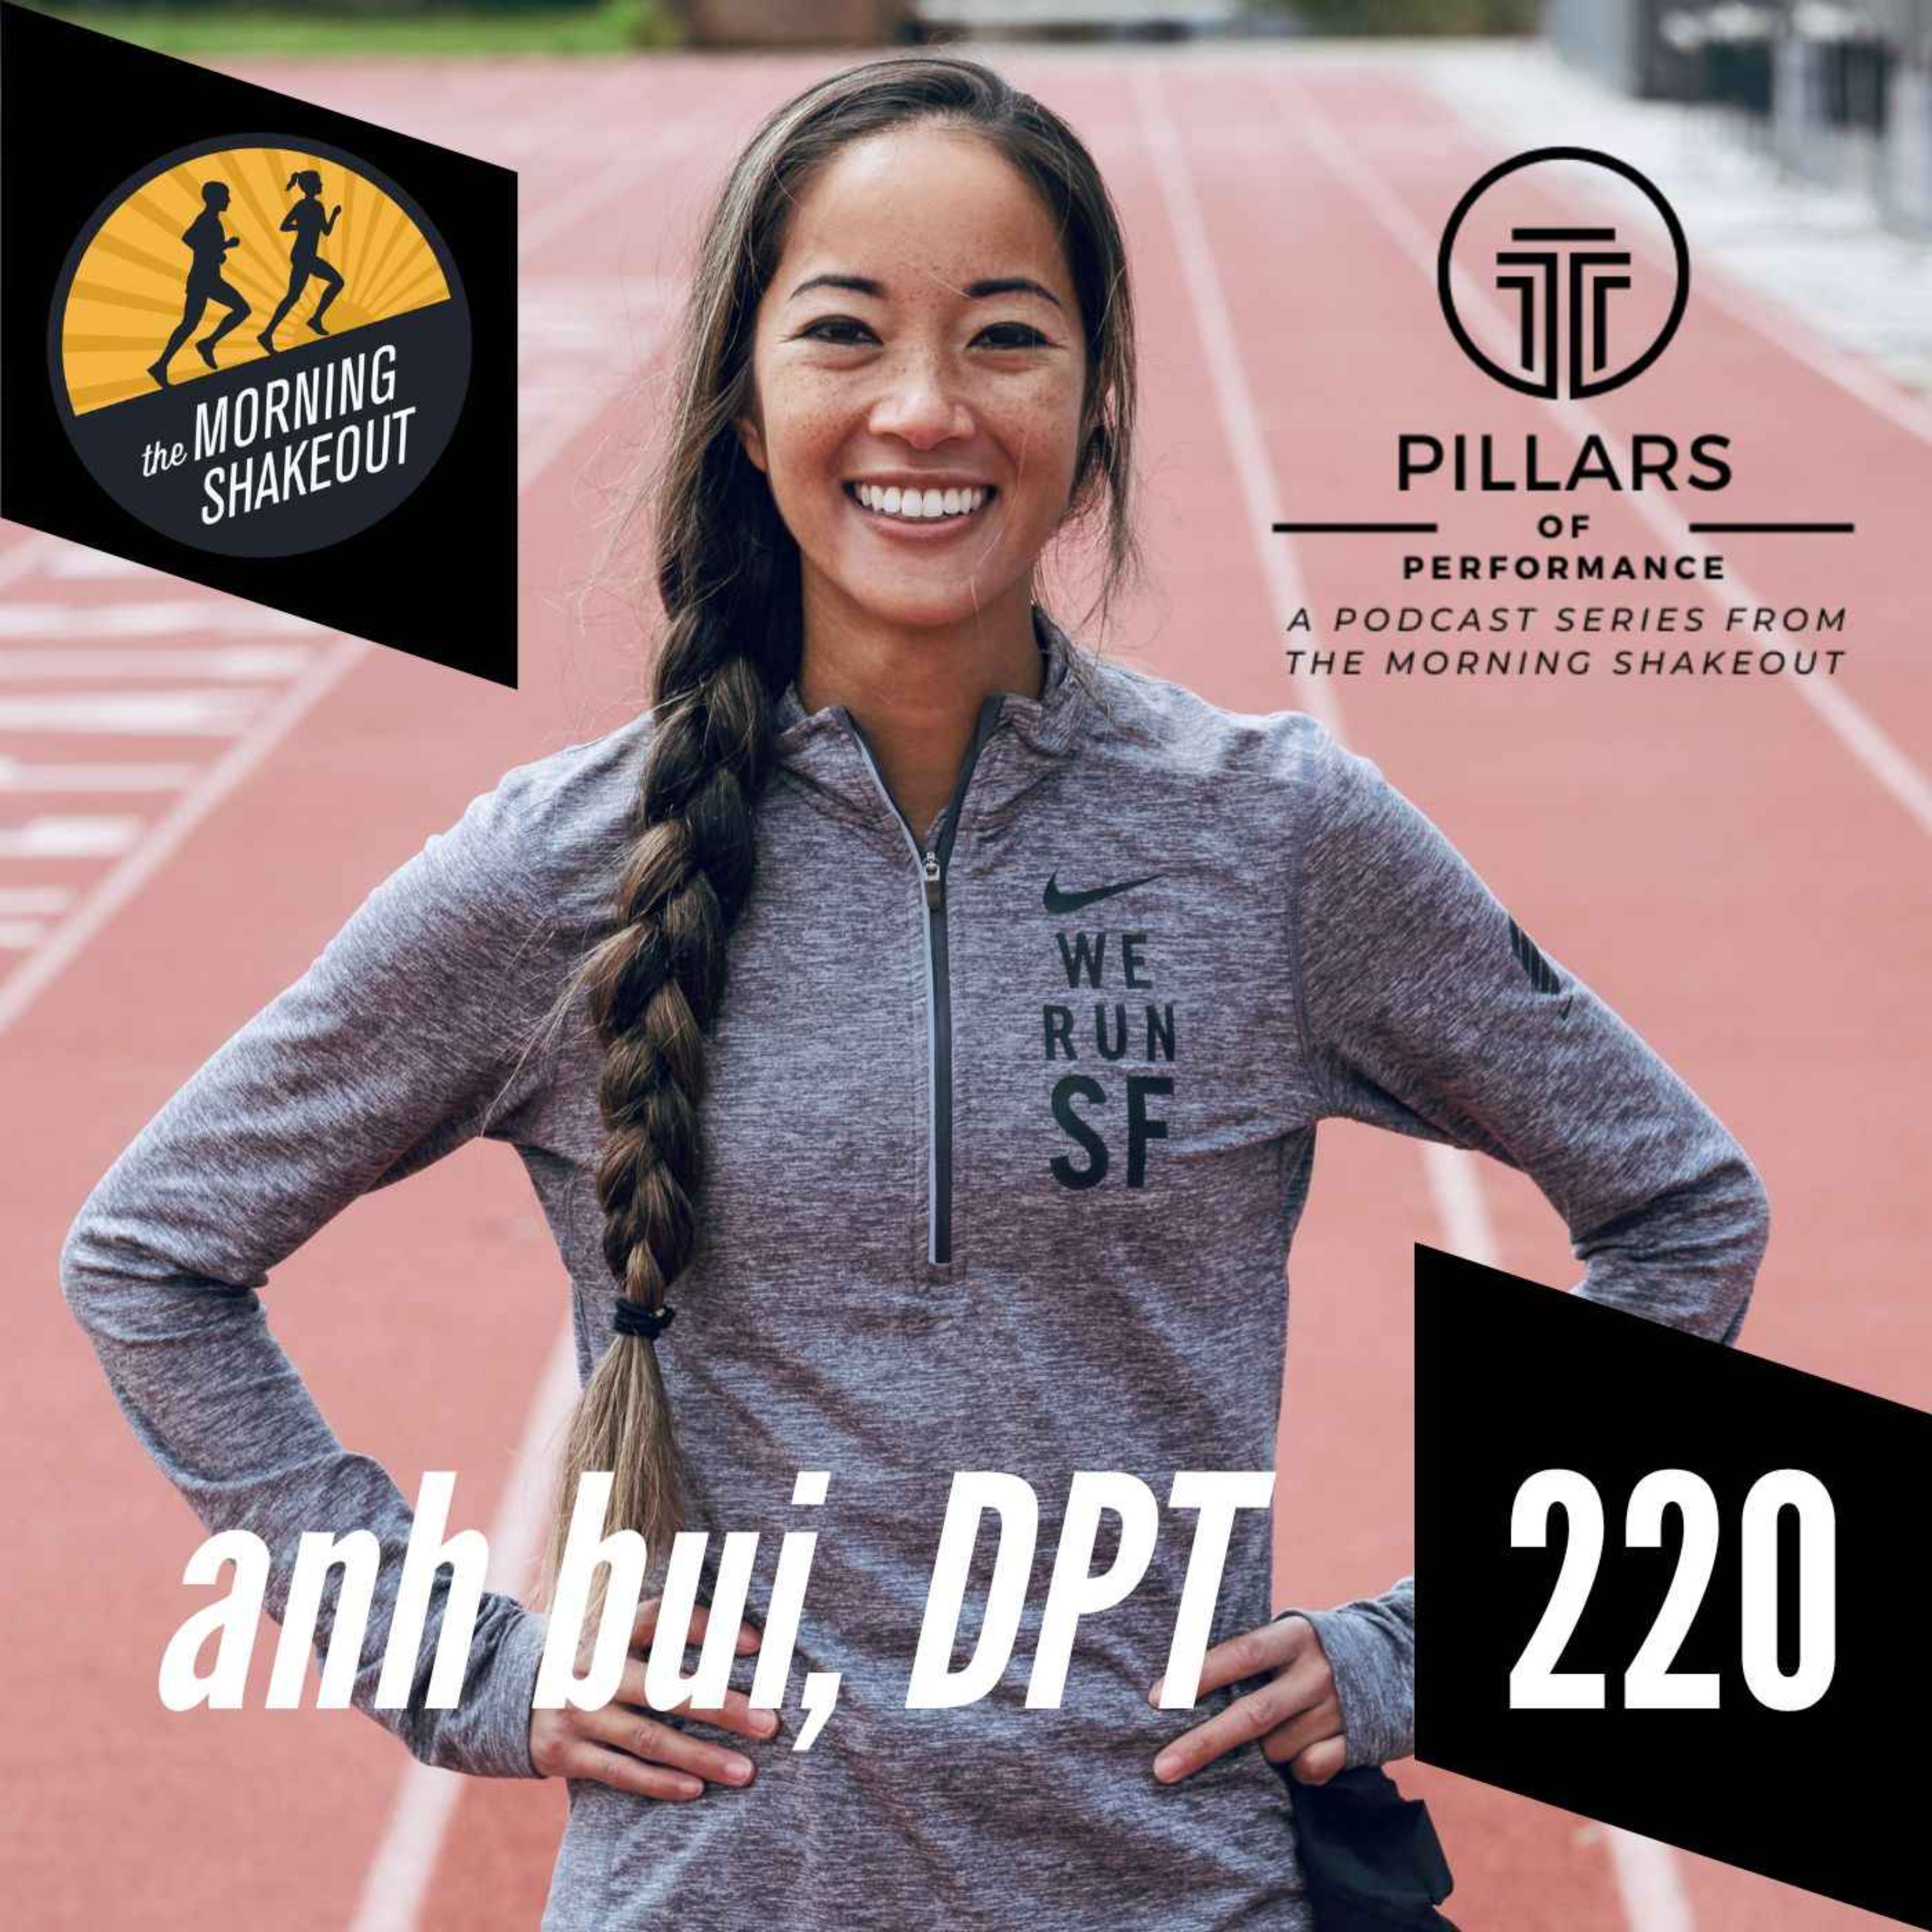 Episode 220 | Anh Bui, DPT, on Getting Strong, Staying Healthy, and Running Resiliently